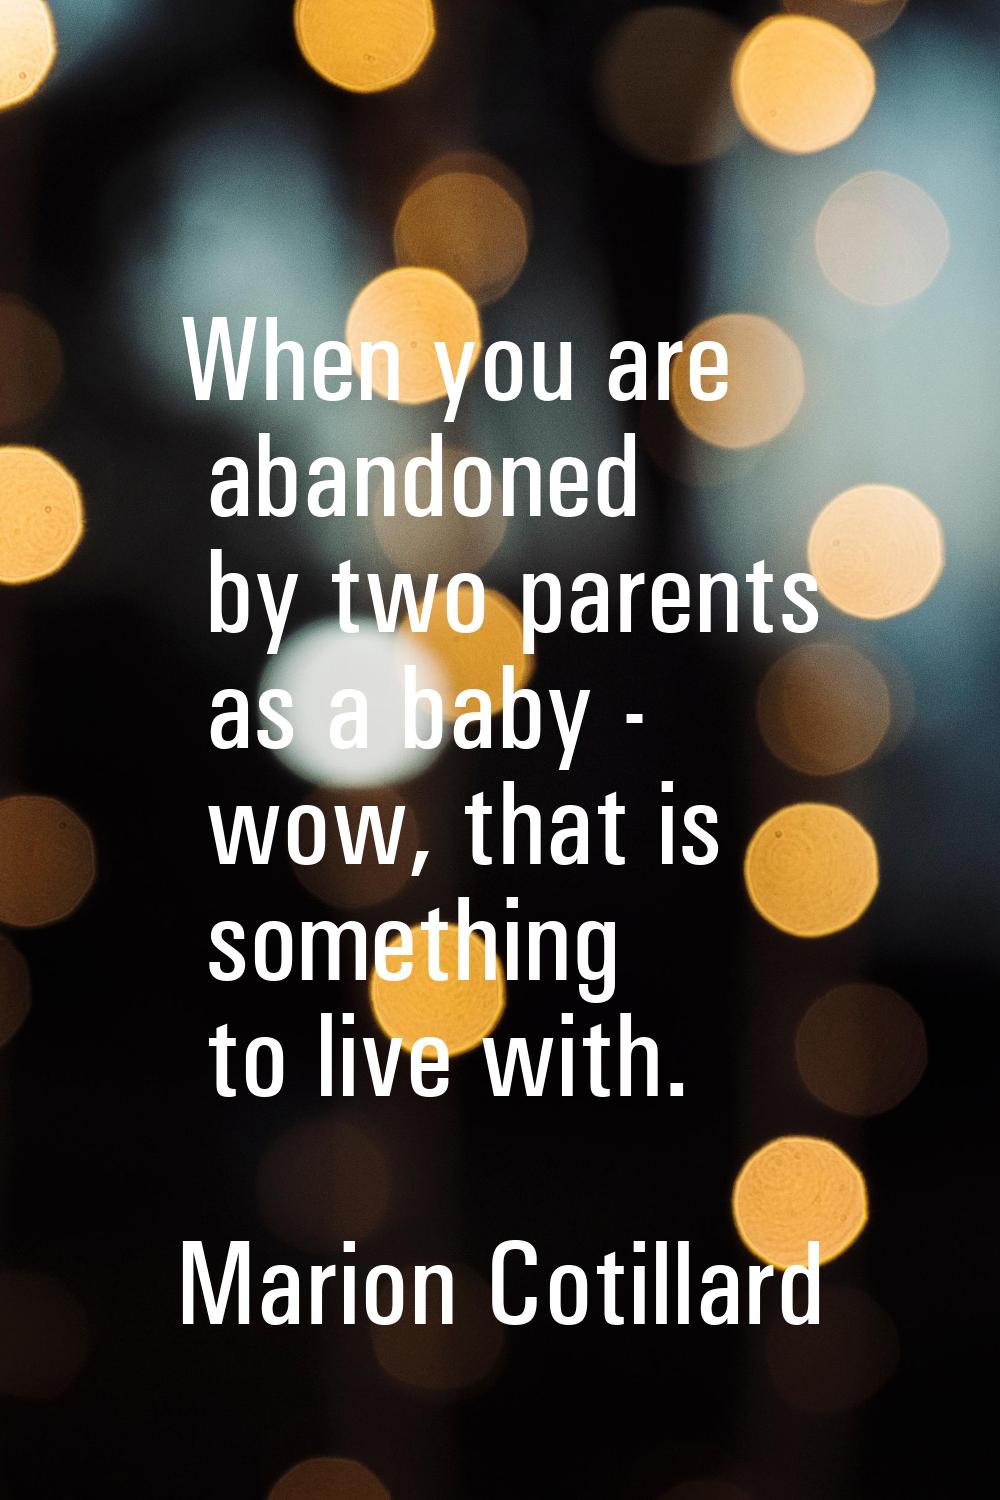 When you are abandoned by two parents as a baby - wow, that is something to live with.